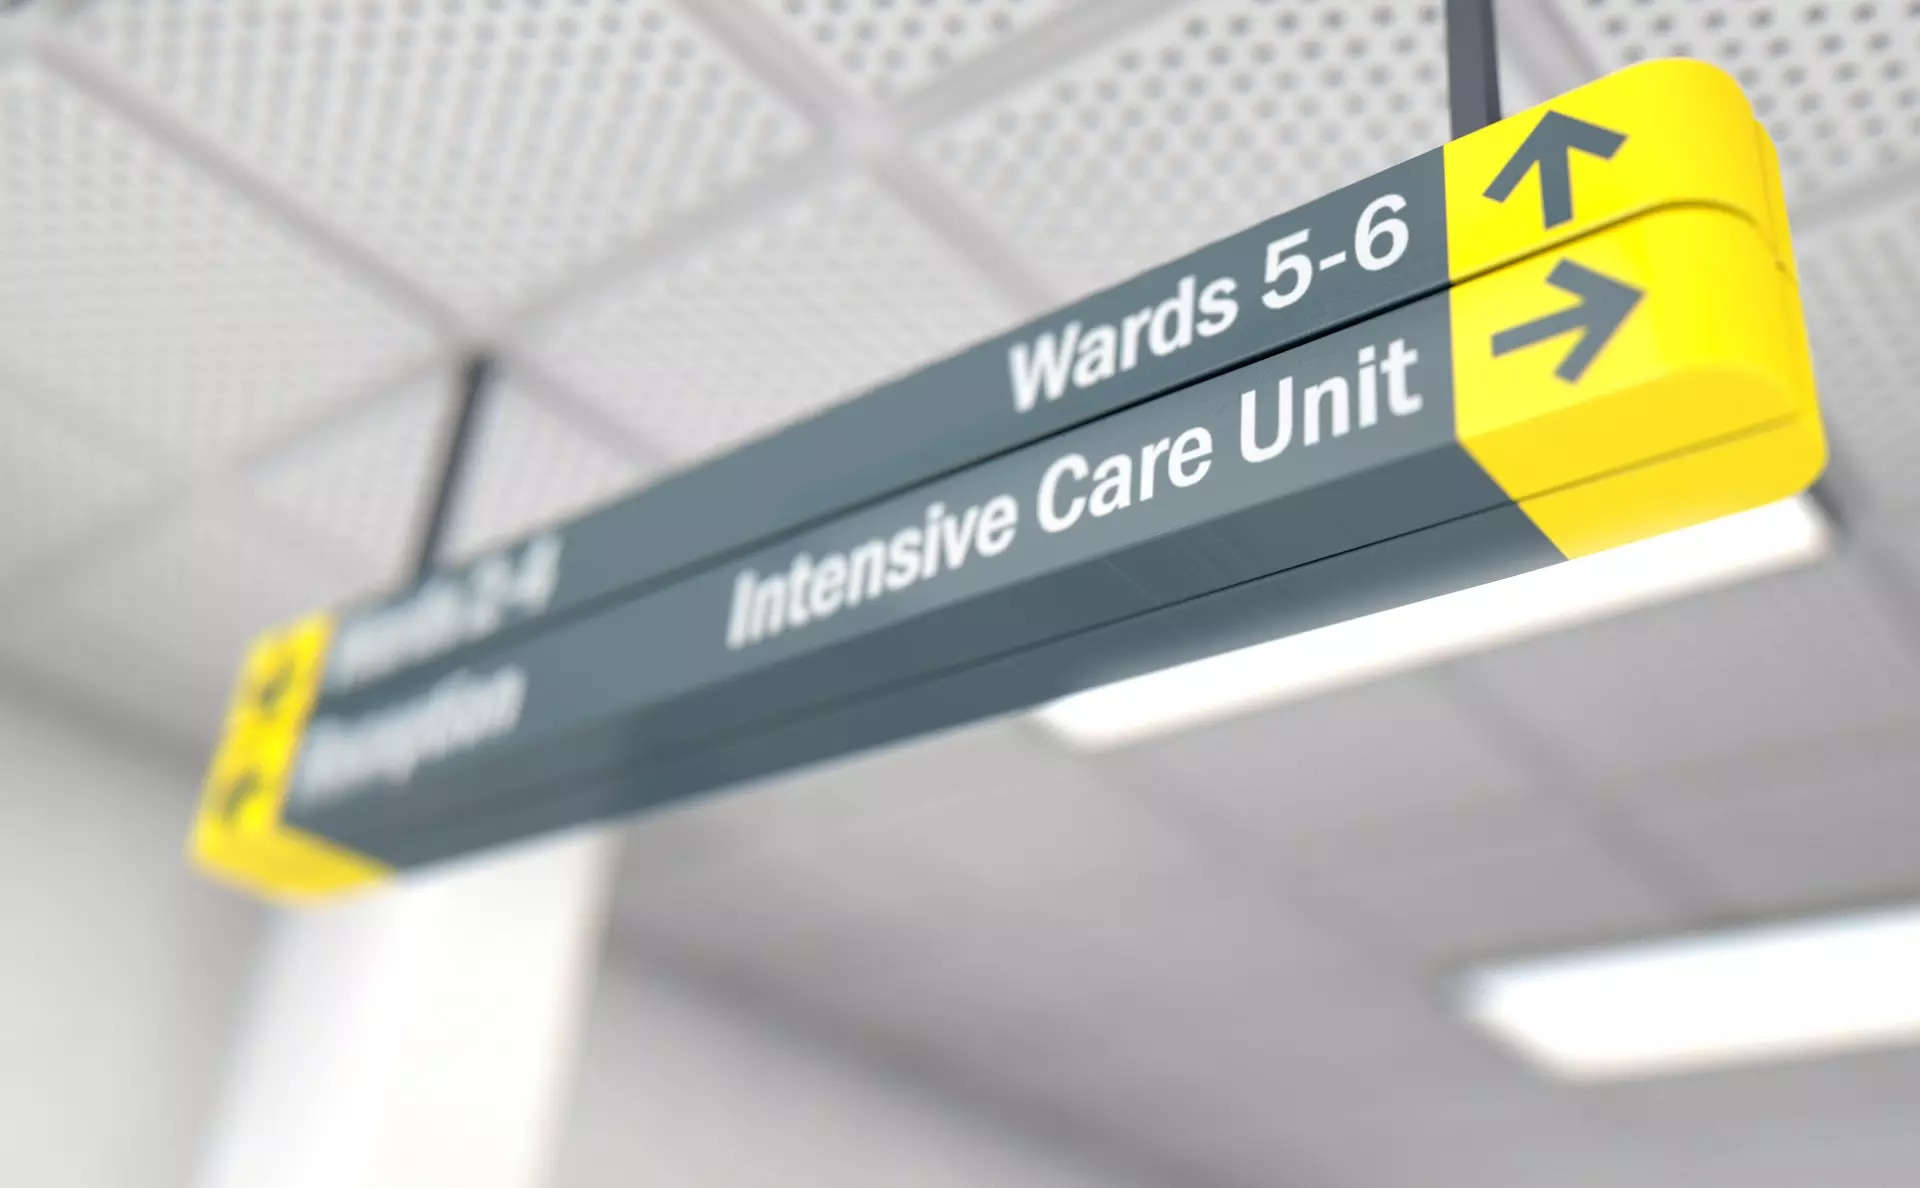 Reforming Intensive Care with Smart-ICUs